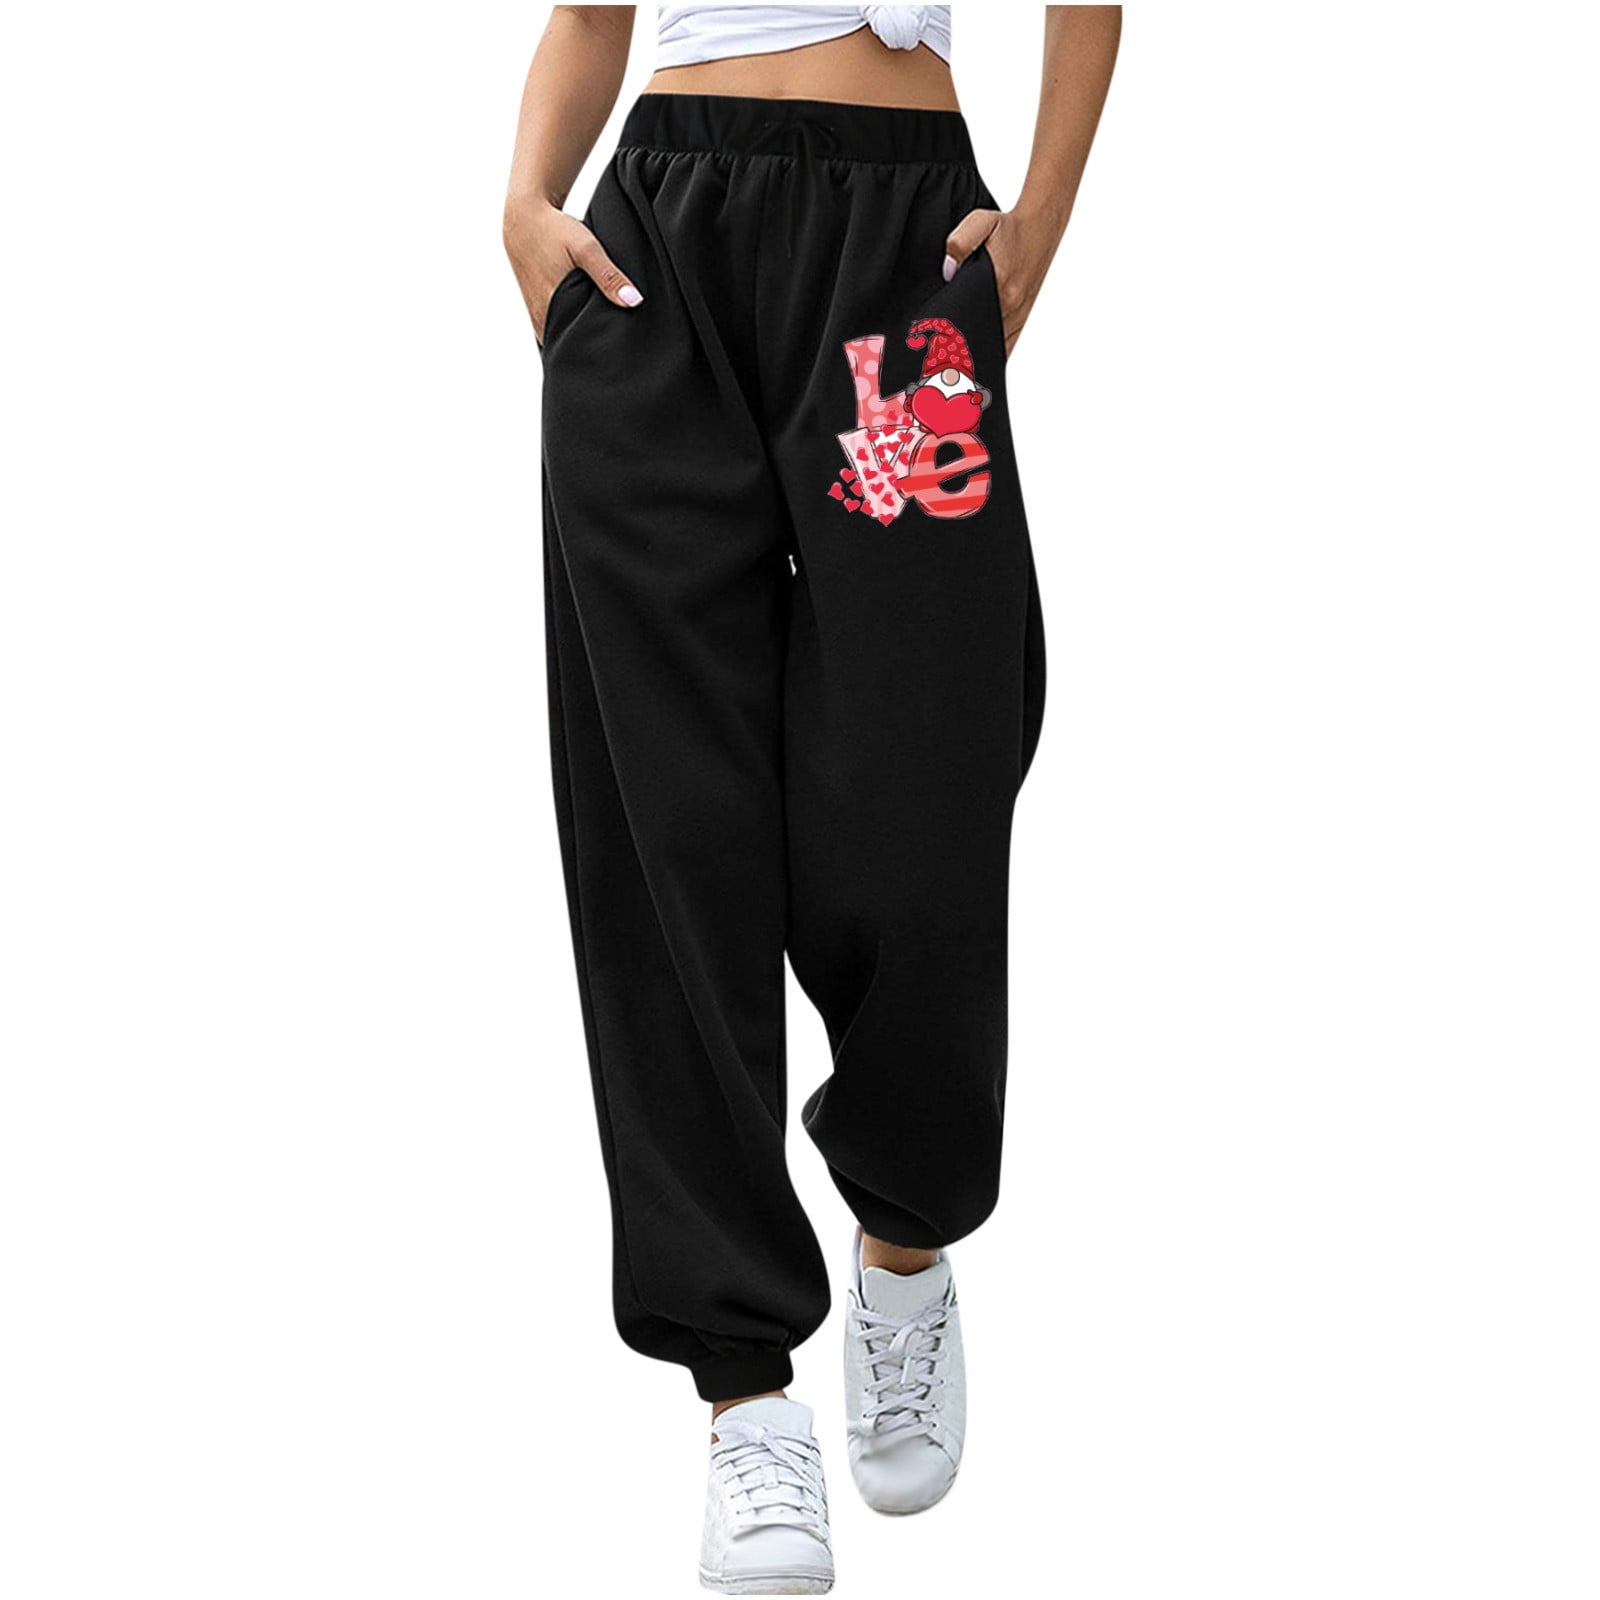 Ladies pants Black and White Stock Photos & Images - Alamy